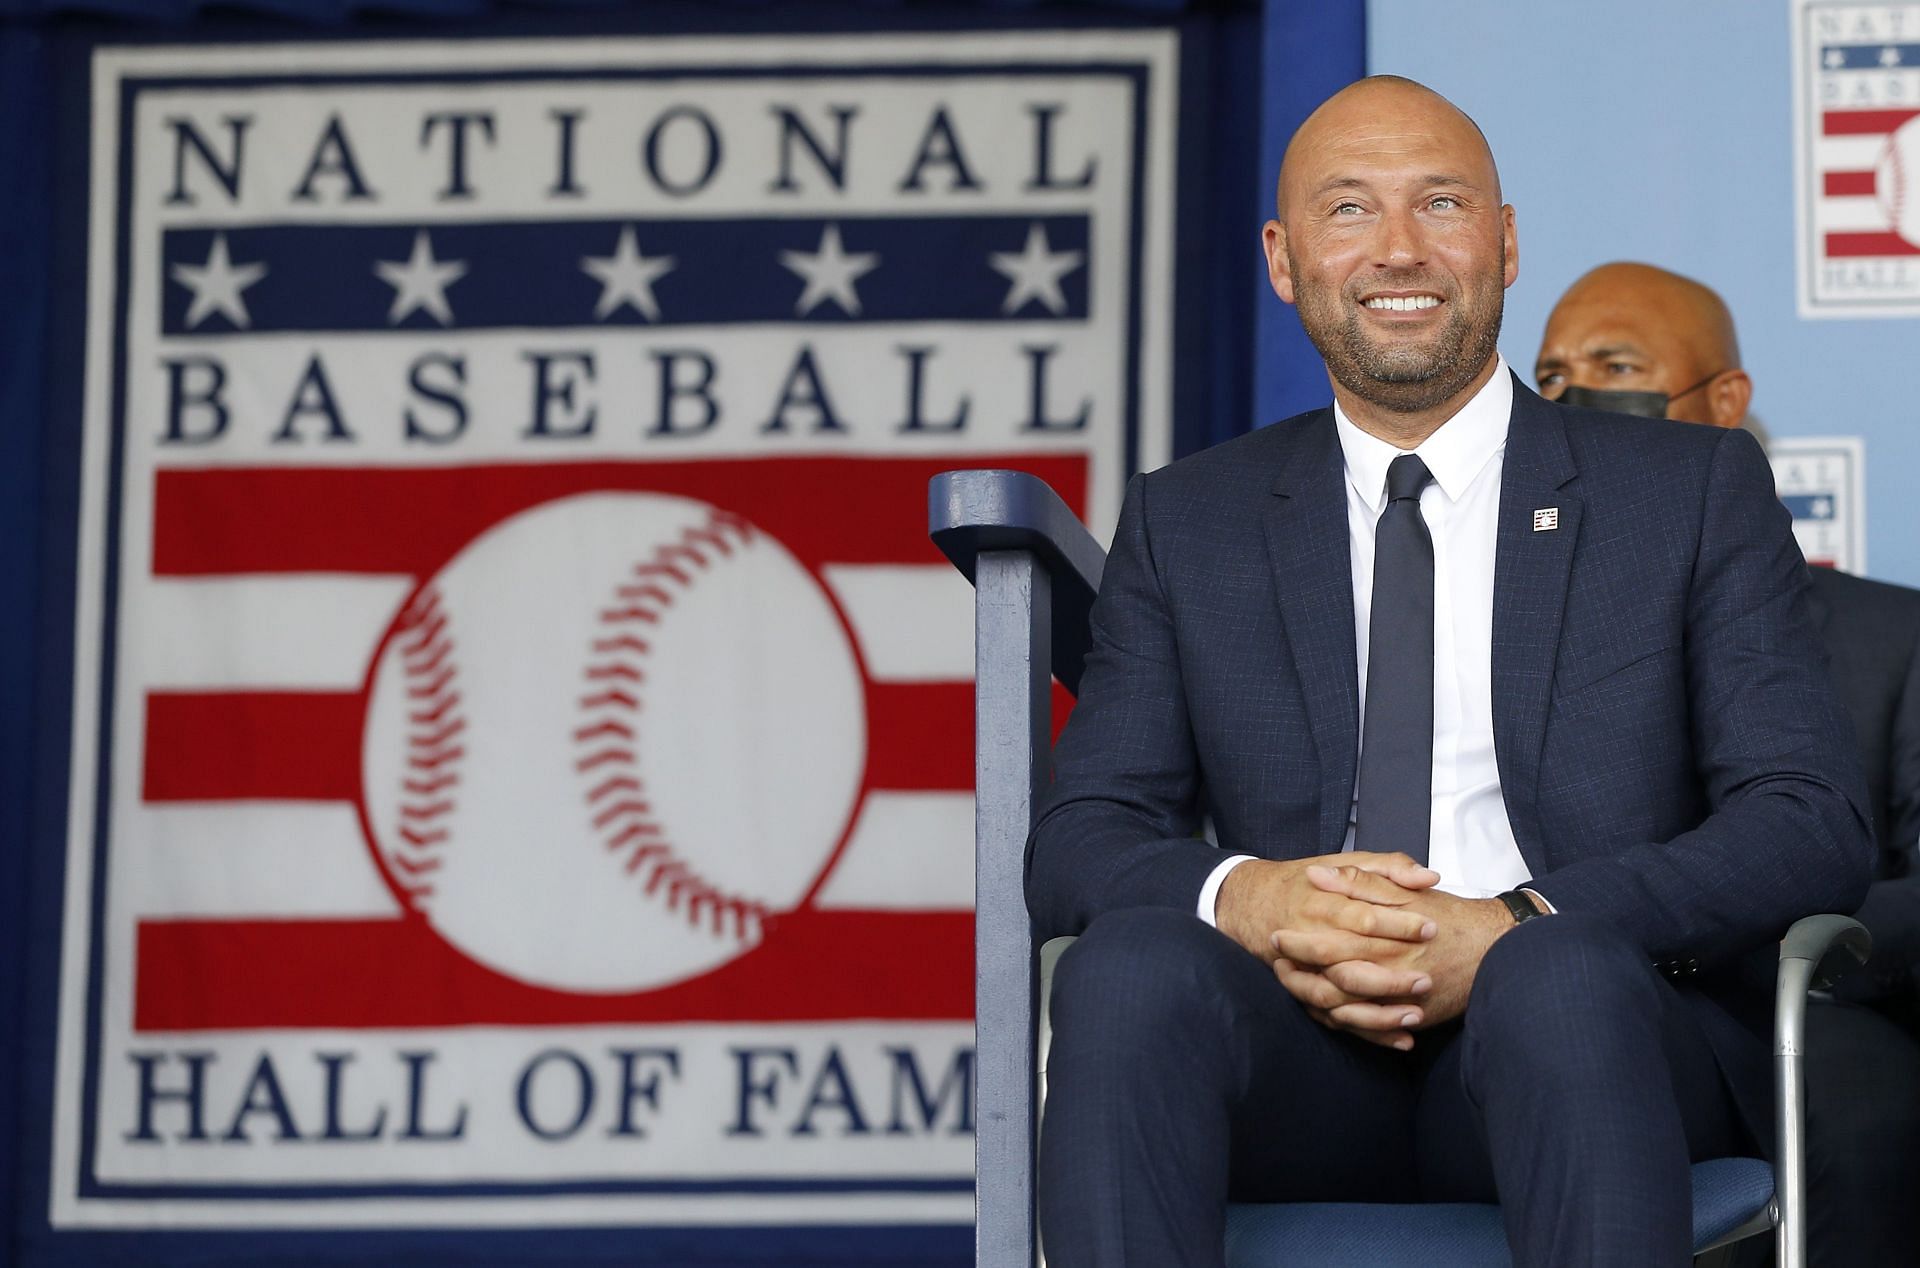 Surprise guest Michael Jordan can relate to Derek Jeter on his retirement  ceremony - Newsday